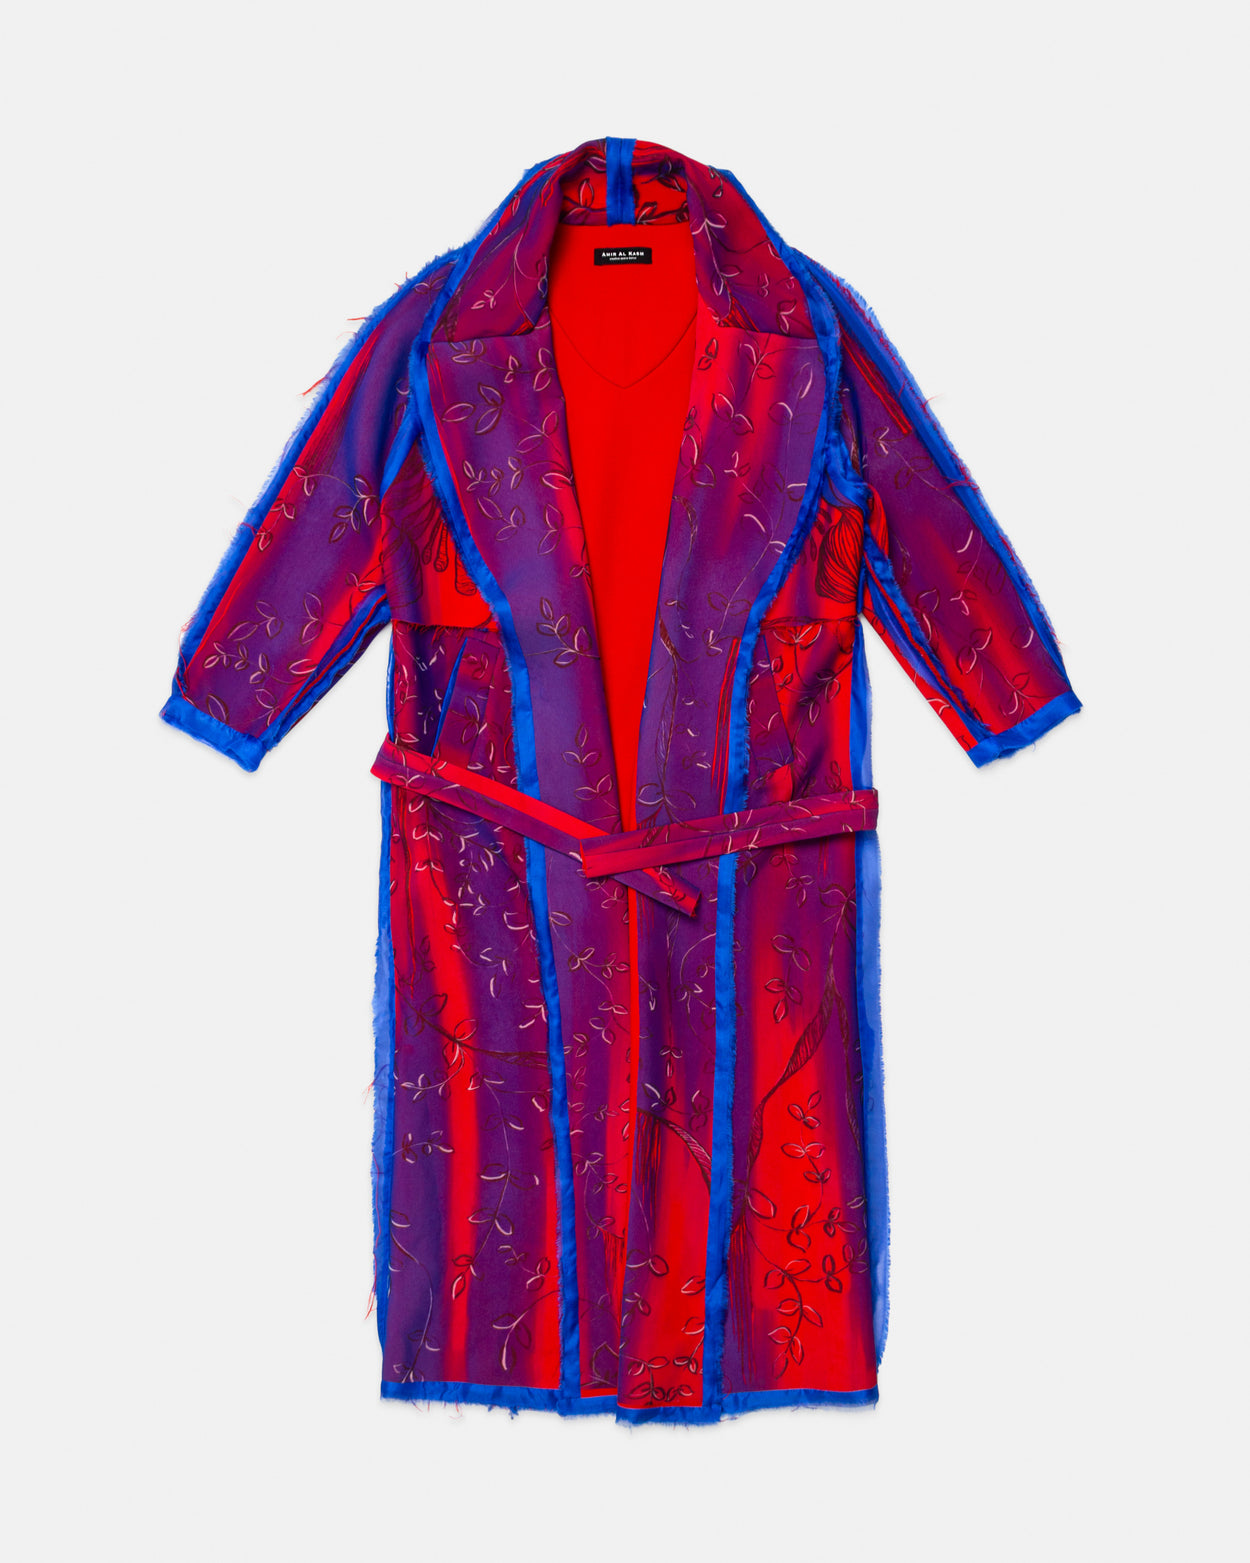 The Psychedelic Coat